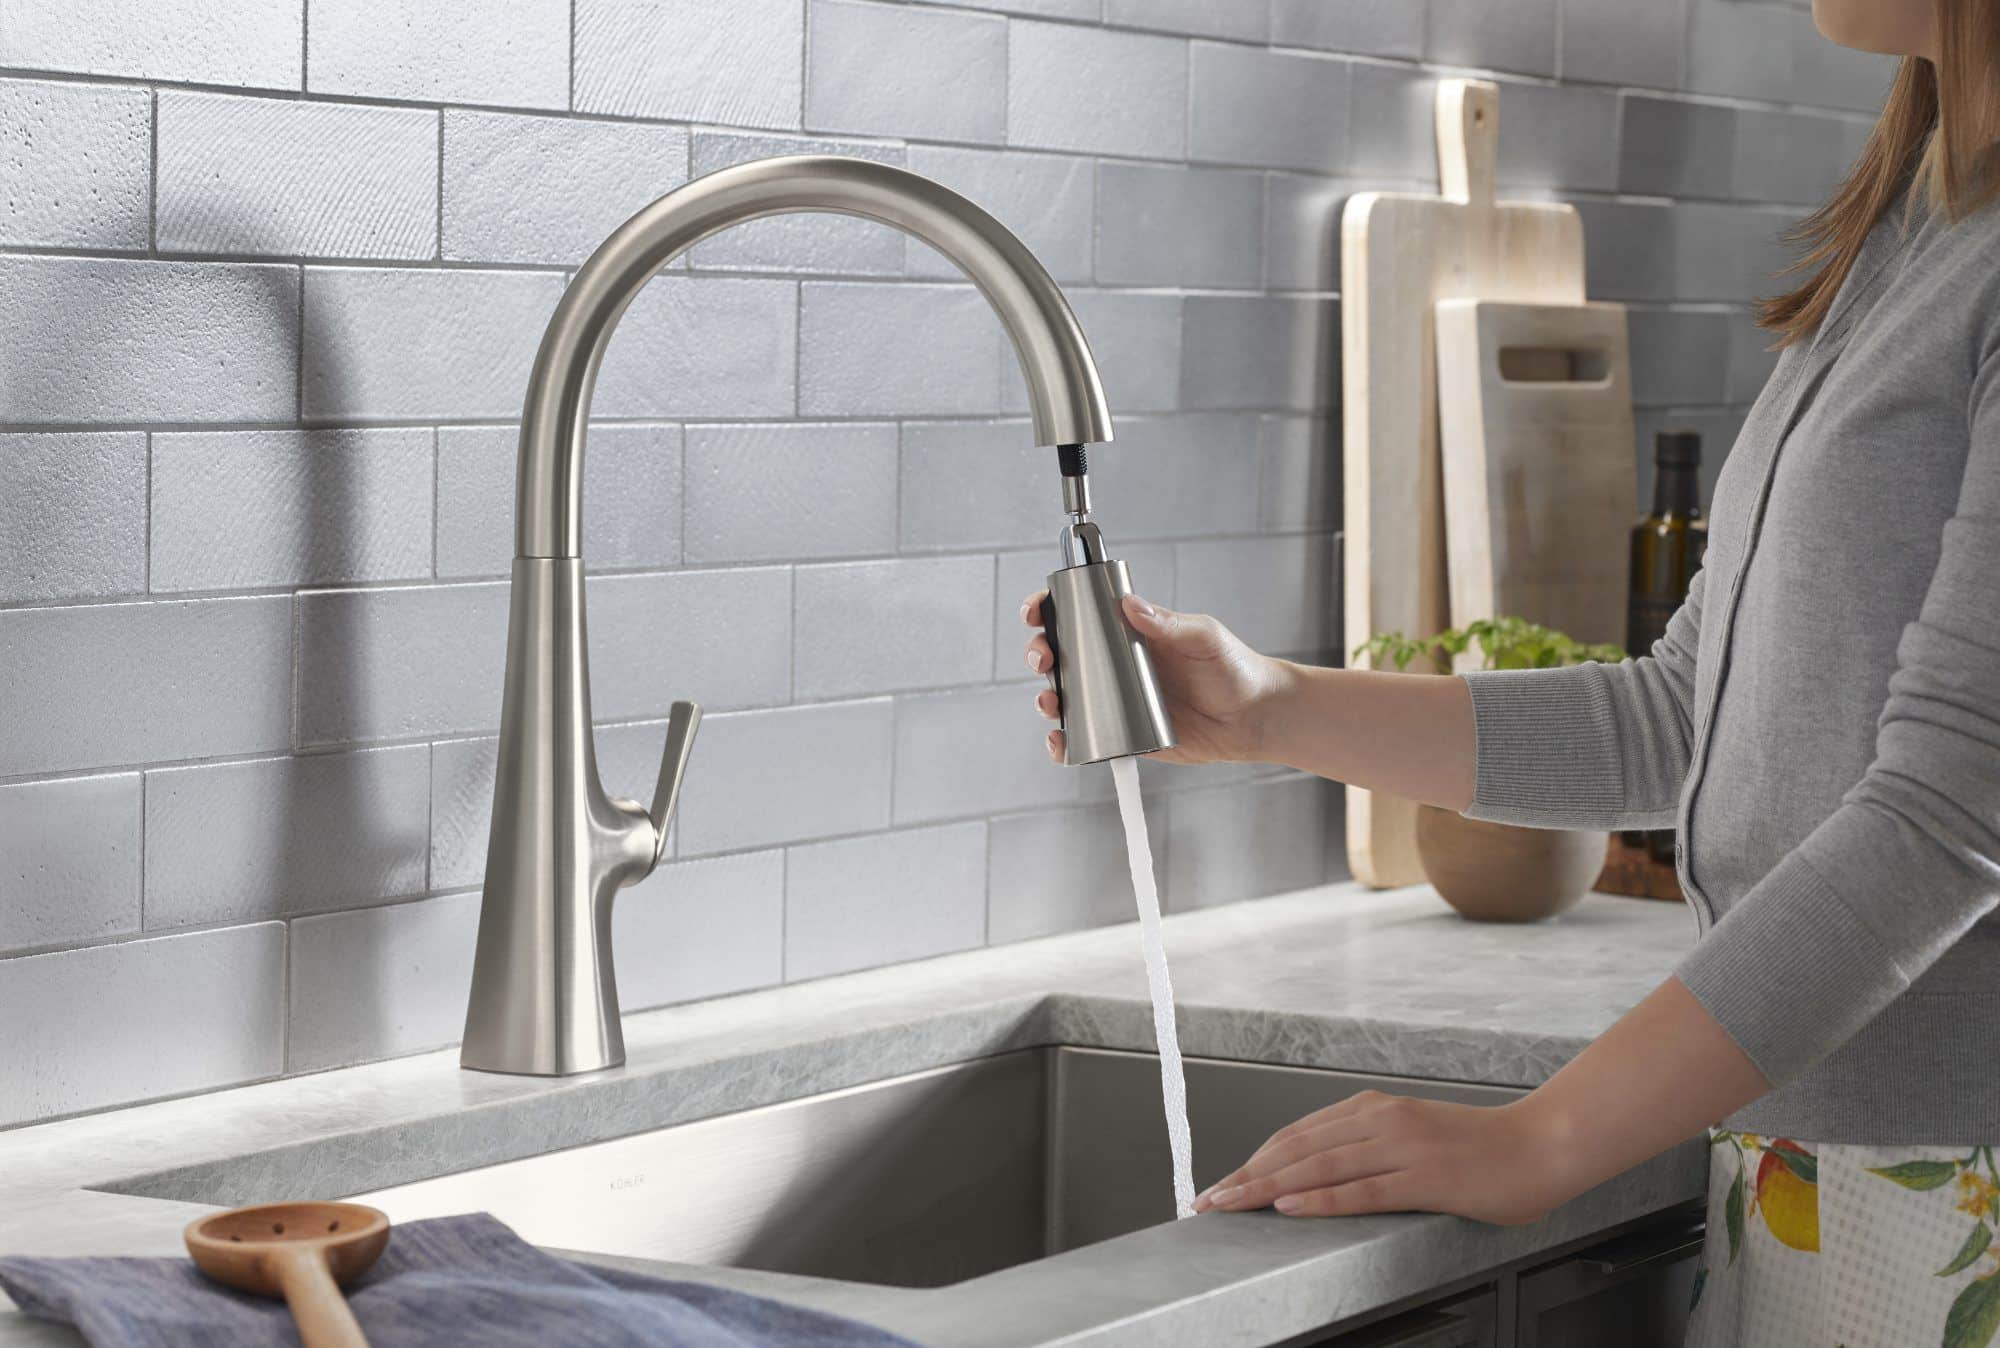 Pull down faucet spray in use